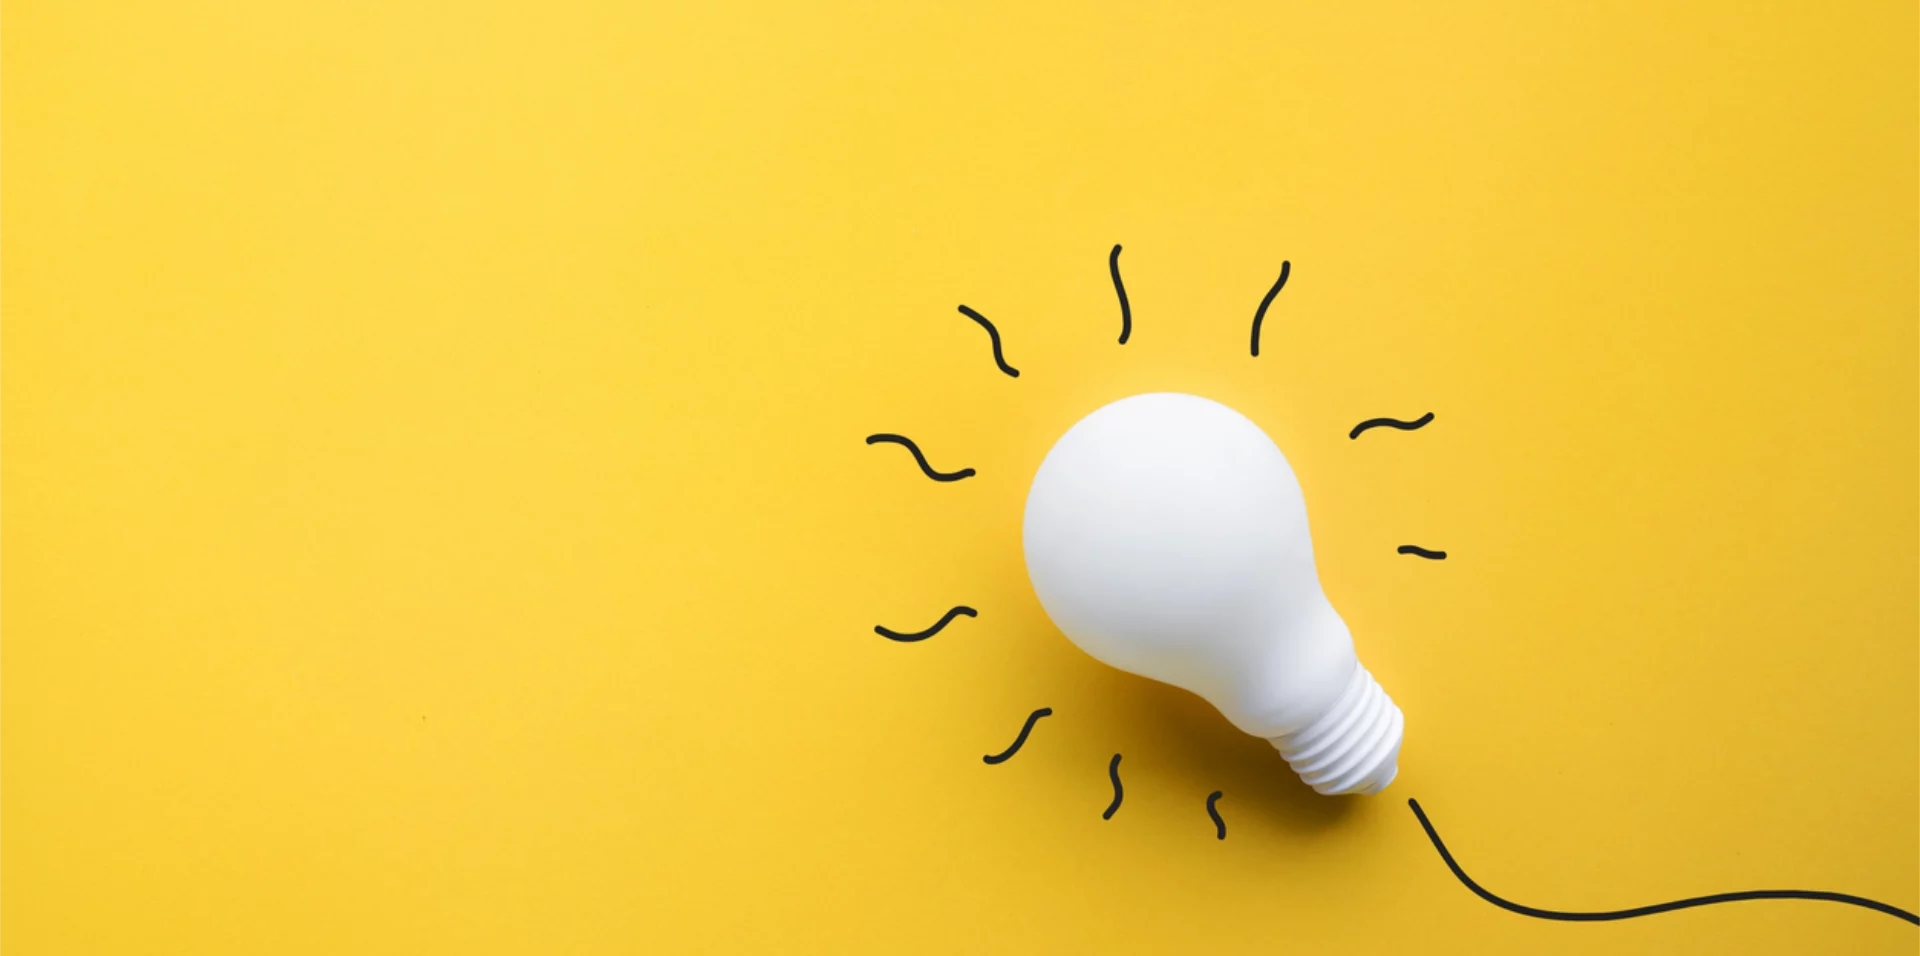 Lightbulb on a yellow background